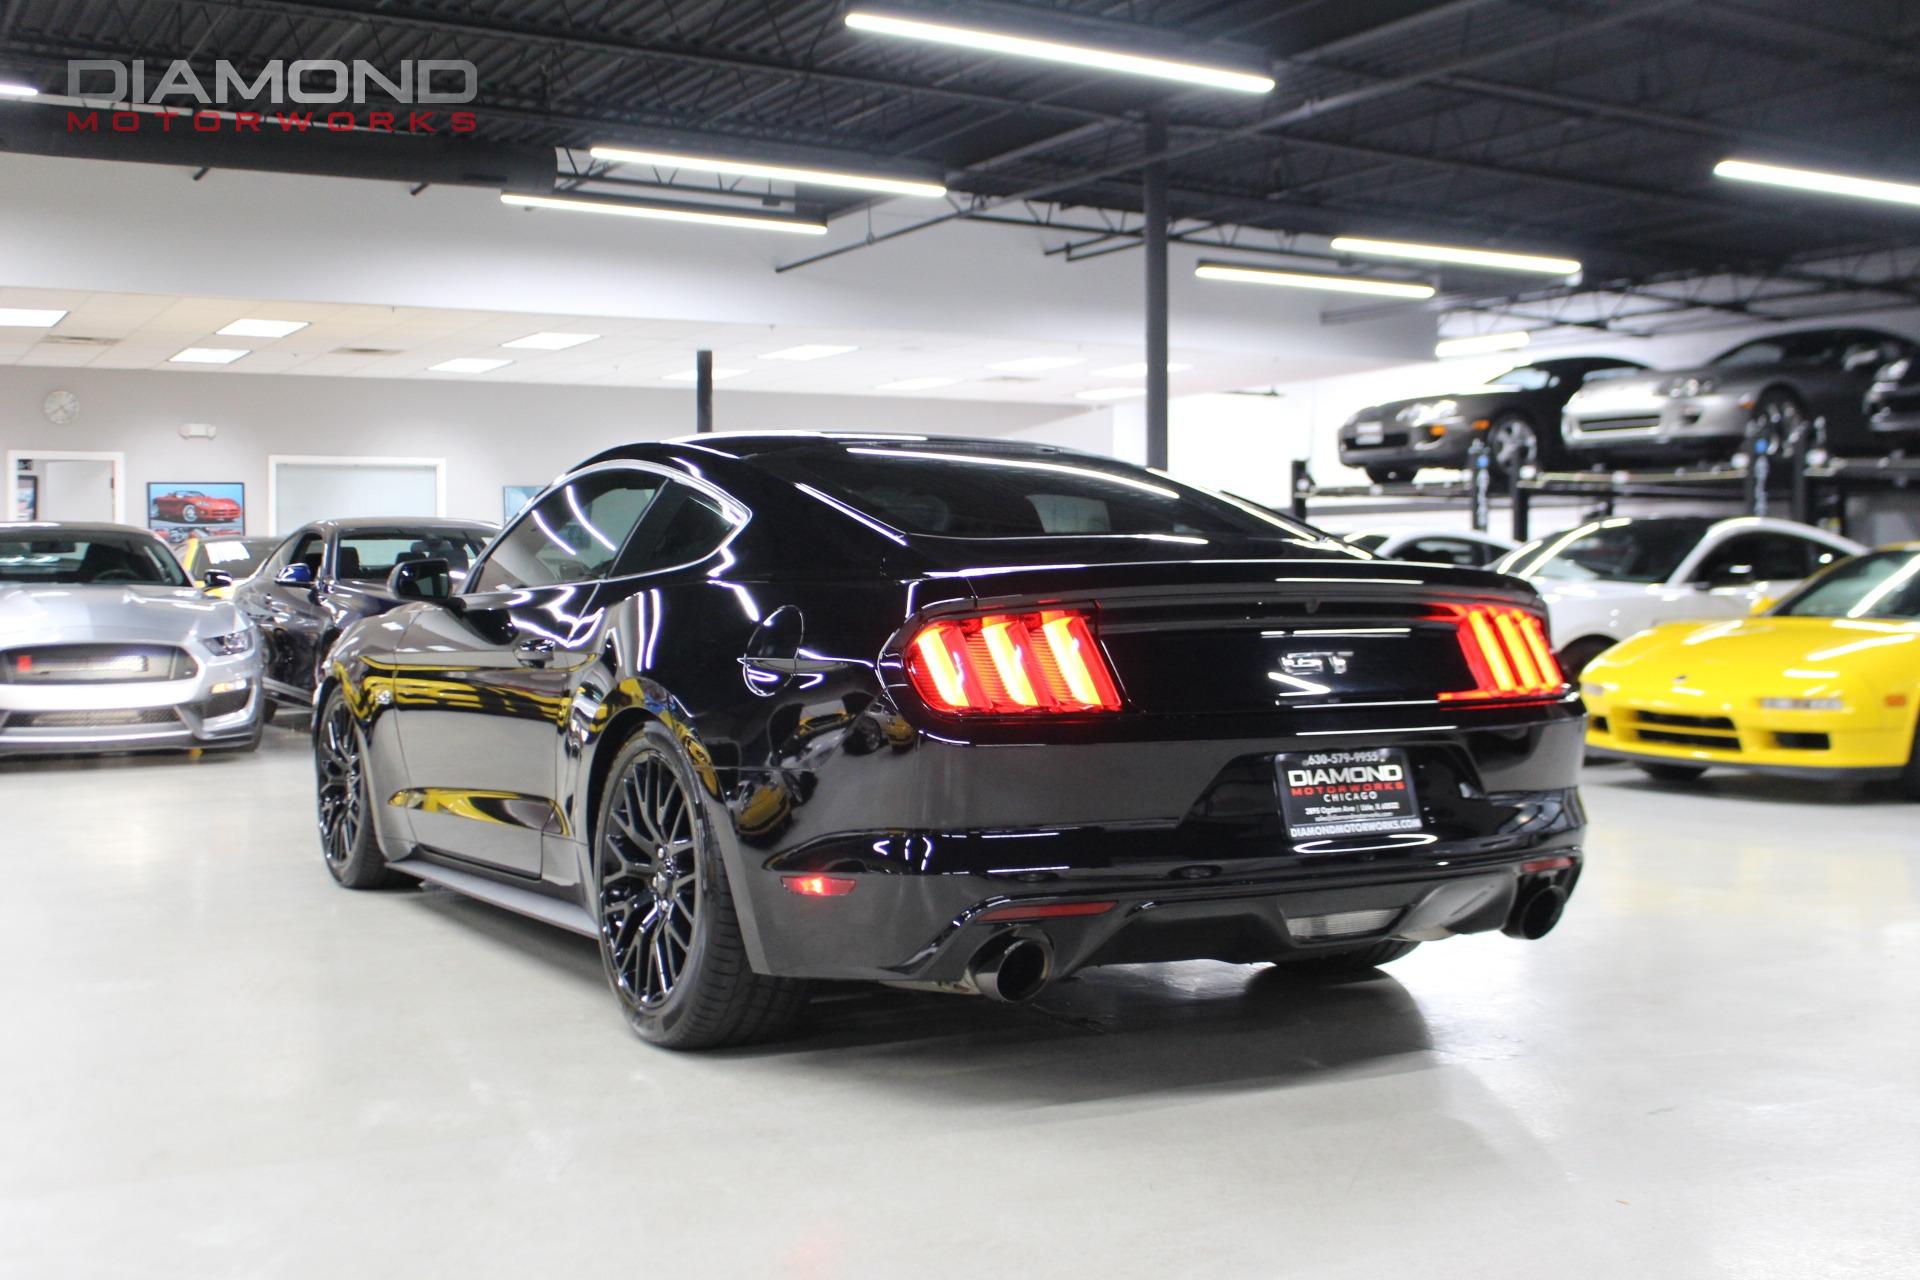 2016 Ford Mustang GT Supercharged Stock # 310203 for sale near Lisle, IL